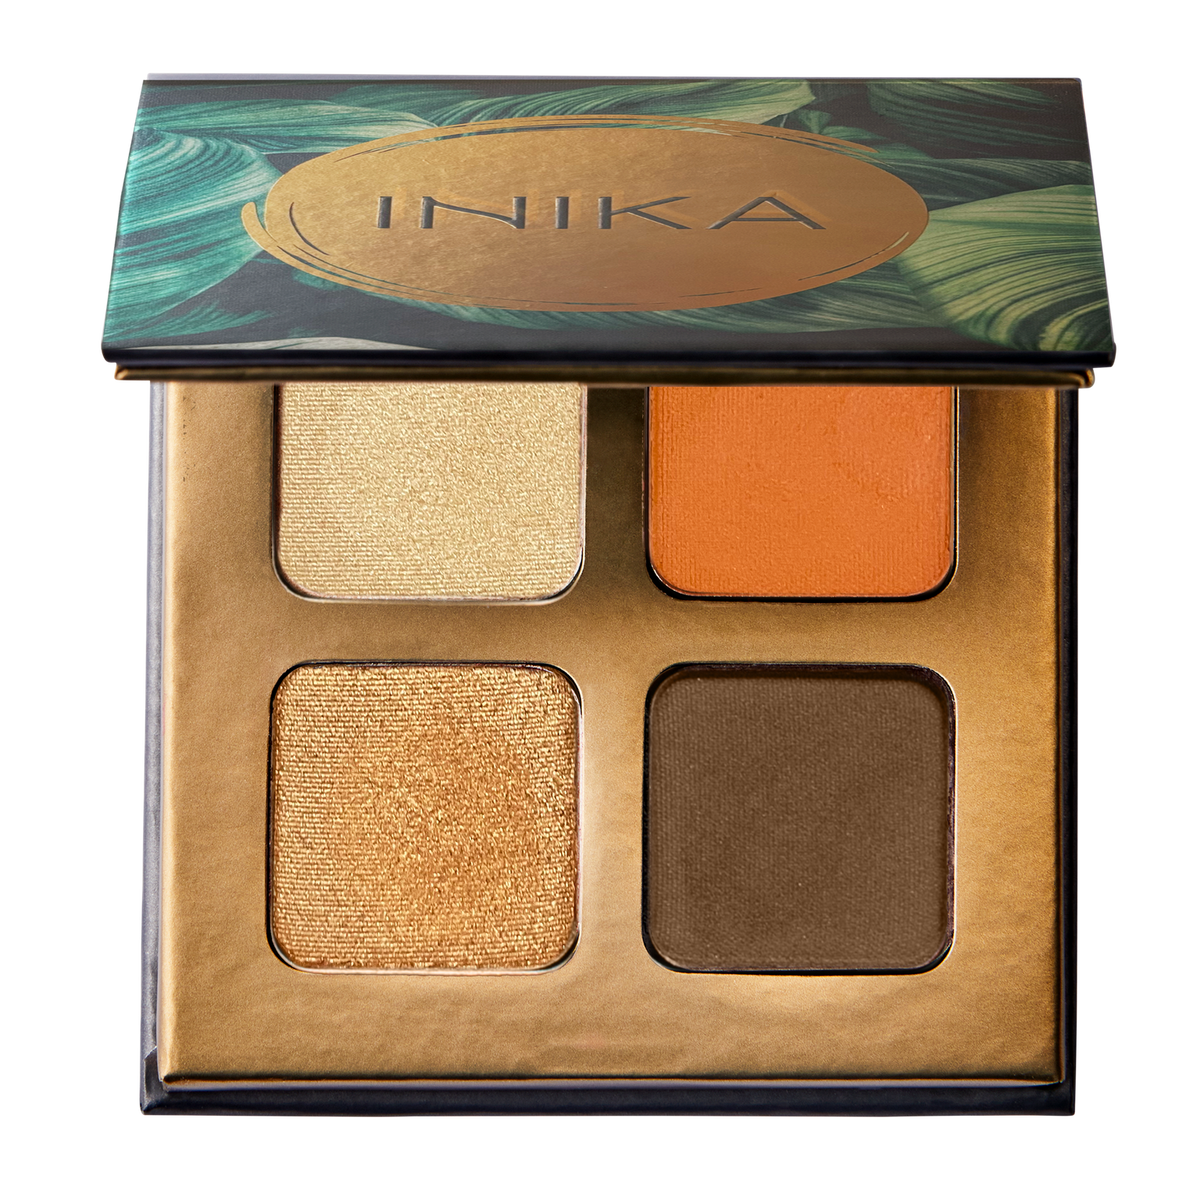 Eyeshadow quad. Contains four beautiful eyeshadow colors of light cream color, gold, brown and burnt orange.